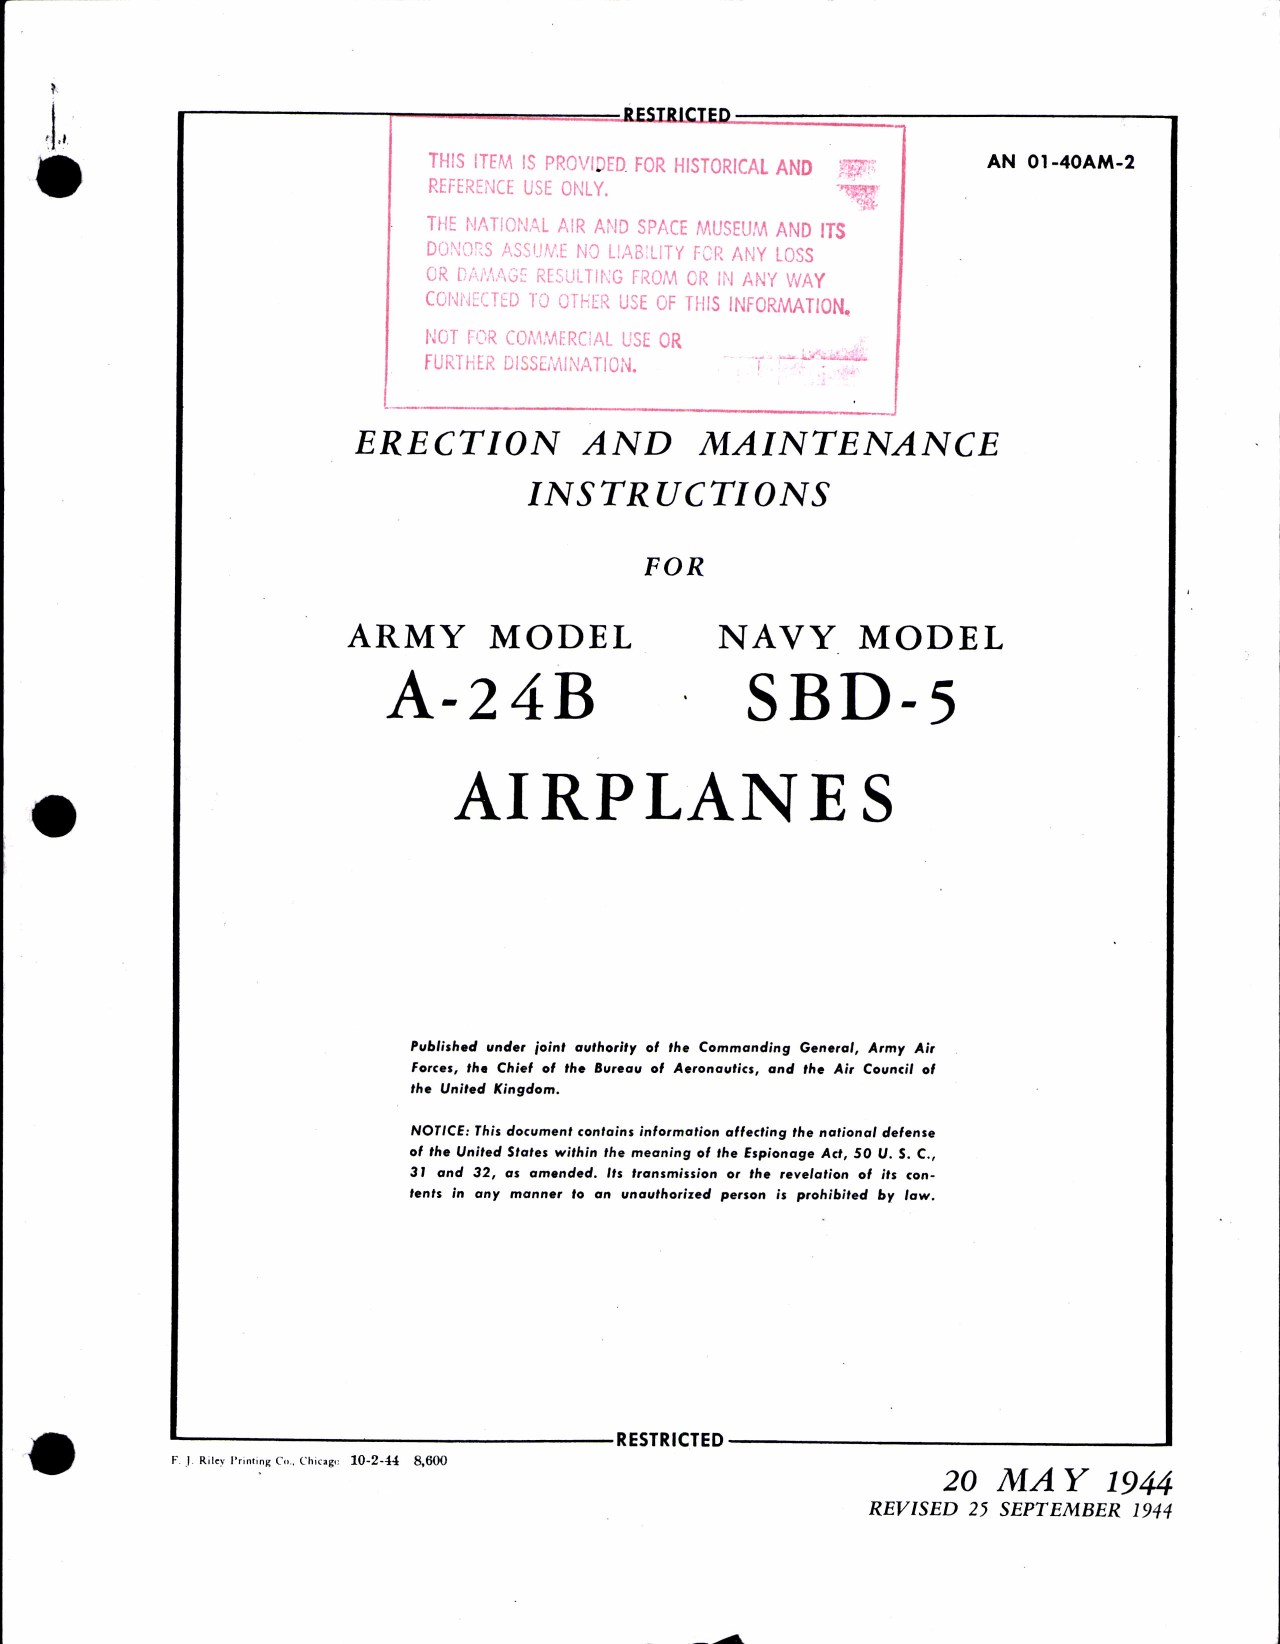 Sample page 1 from AirCorps Library document: Erection and Maintenance Instructions for A-24B and SBD-5 Airplanes